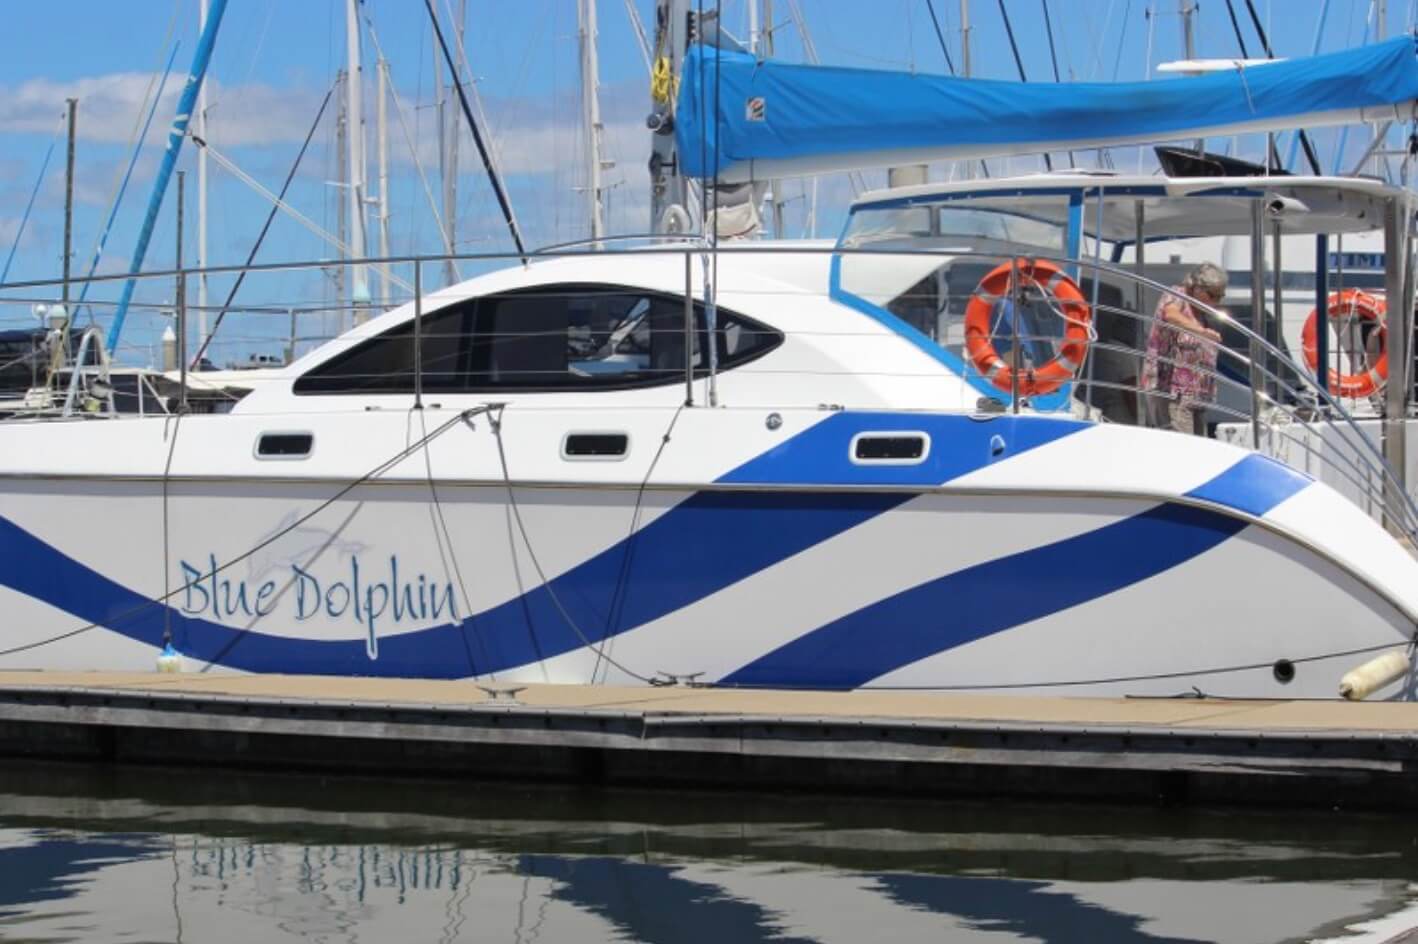 An image of the blue dolphin small catamaran